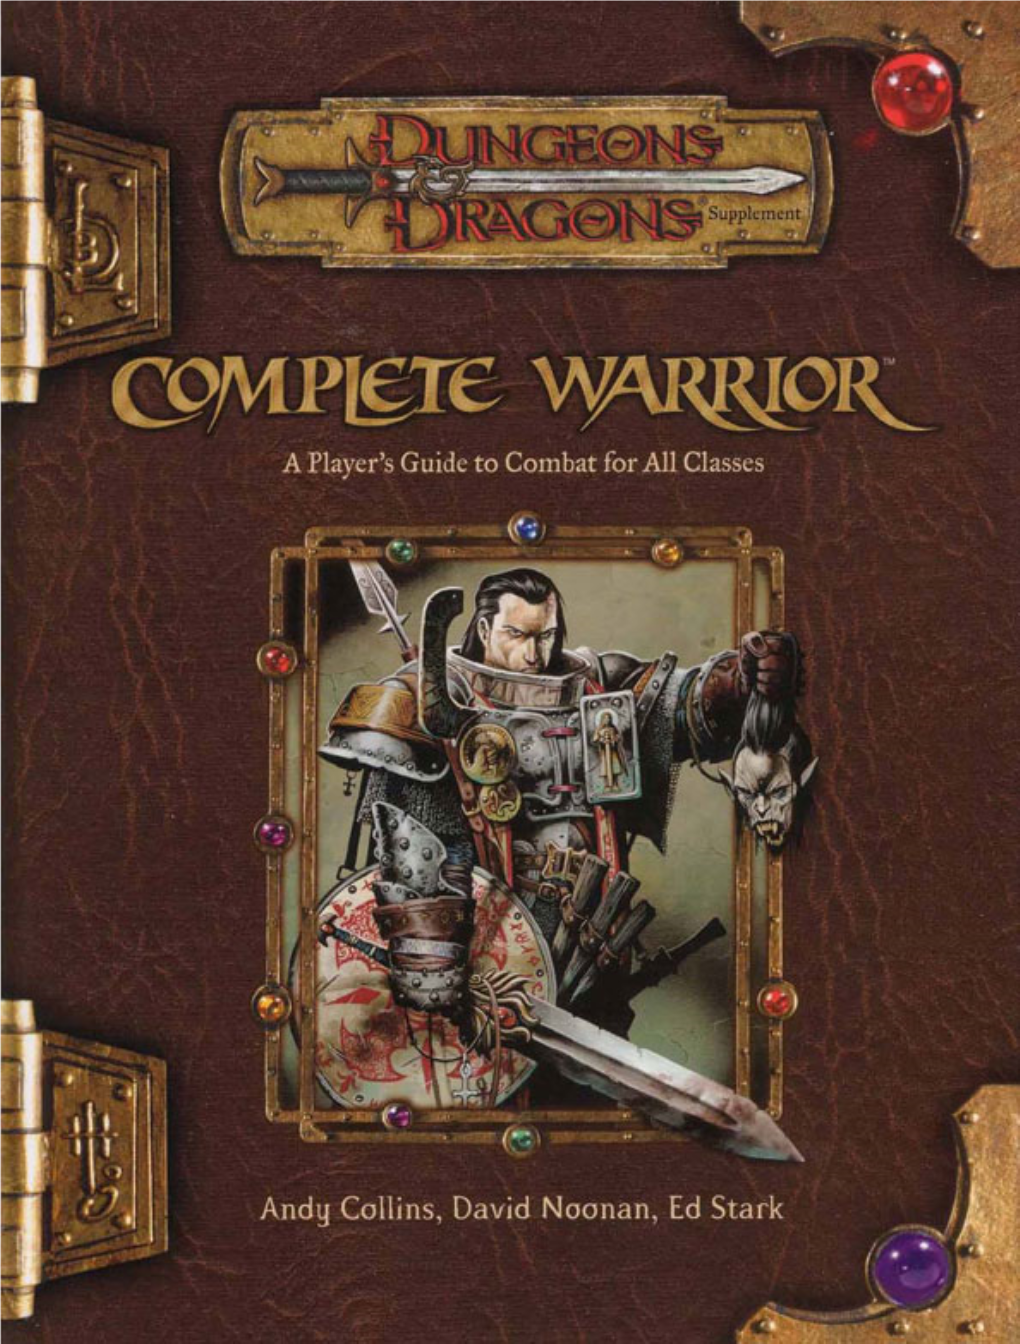 COMPLETE WARRIOR™ a Player’S Guide to Combat for All Classes ANDY COLLINS, DAVID NOONAN, ED STARK